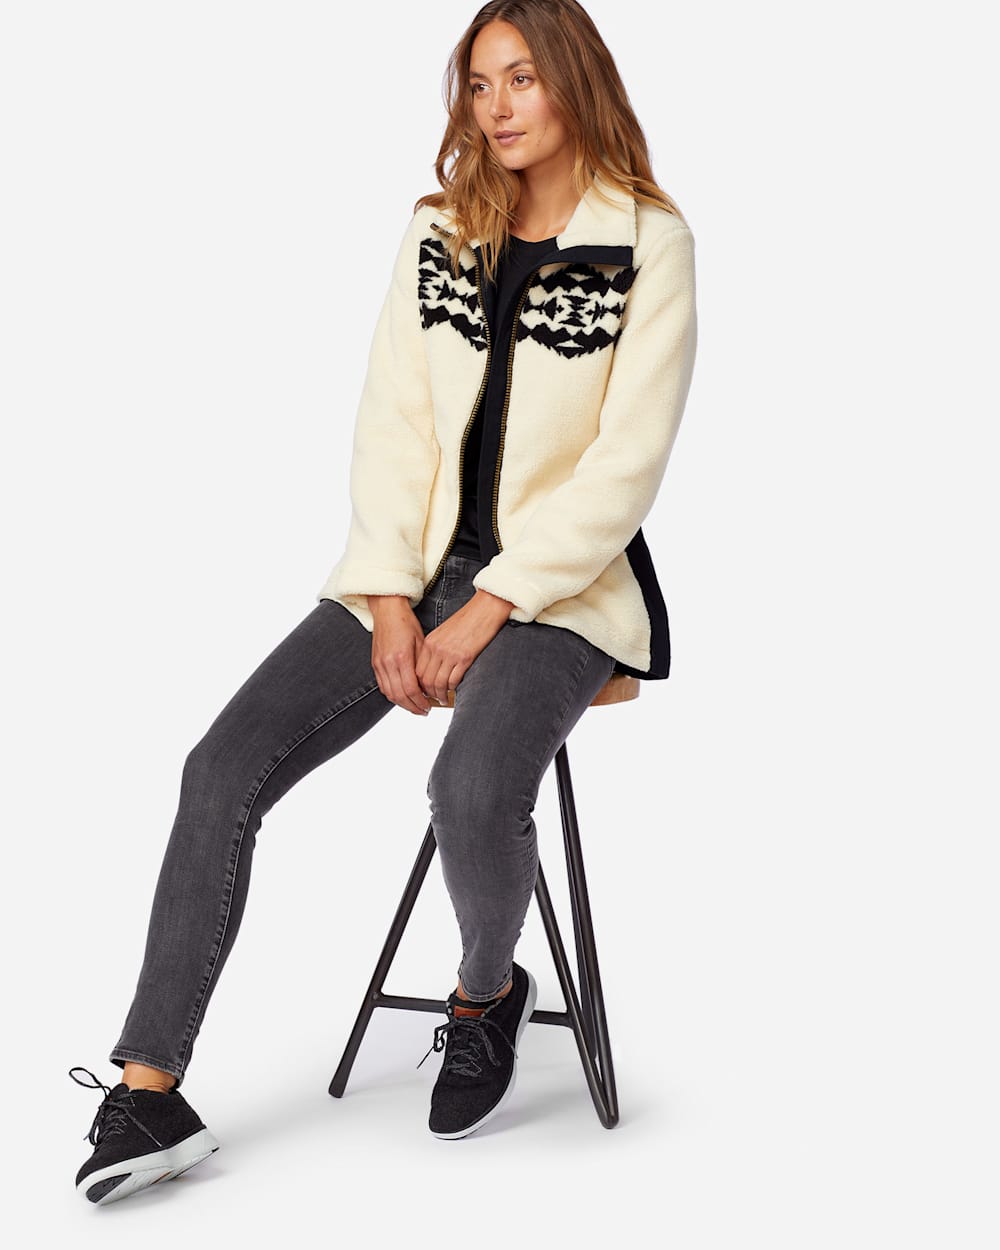 ALTERNATE VIEW OF WOMEN'S BROOKE SONORA SHERPA JACKET IN IVORY SONORA image number 4